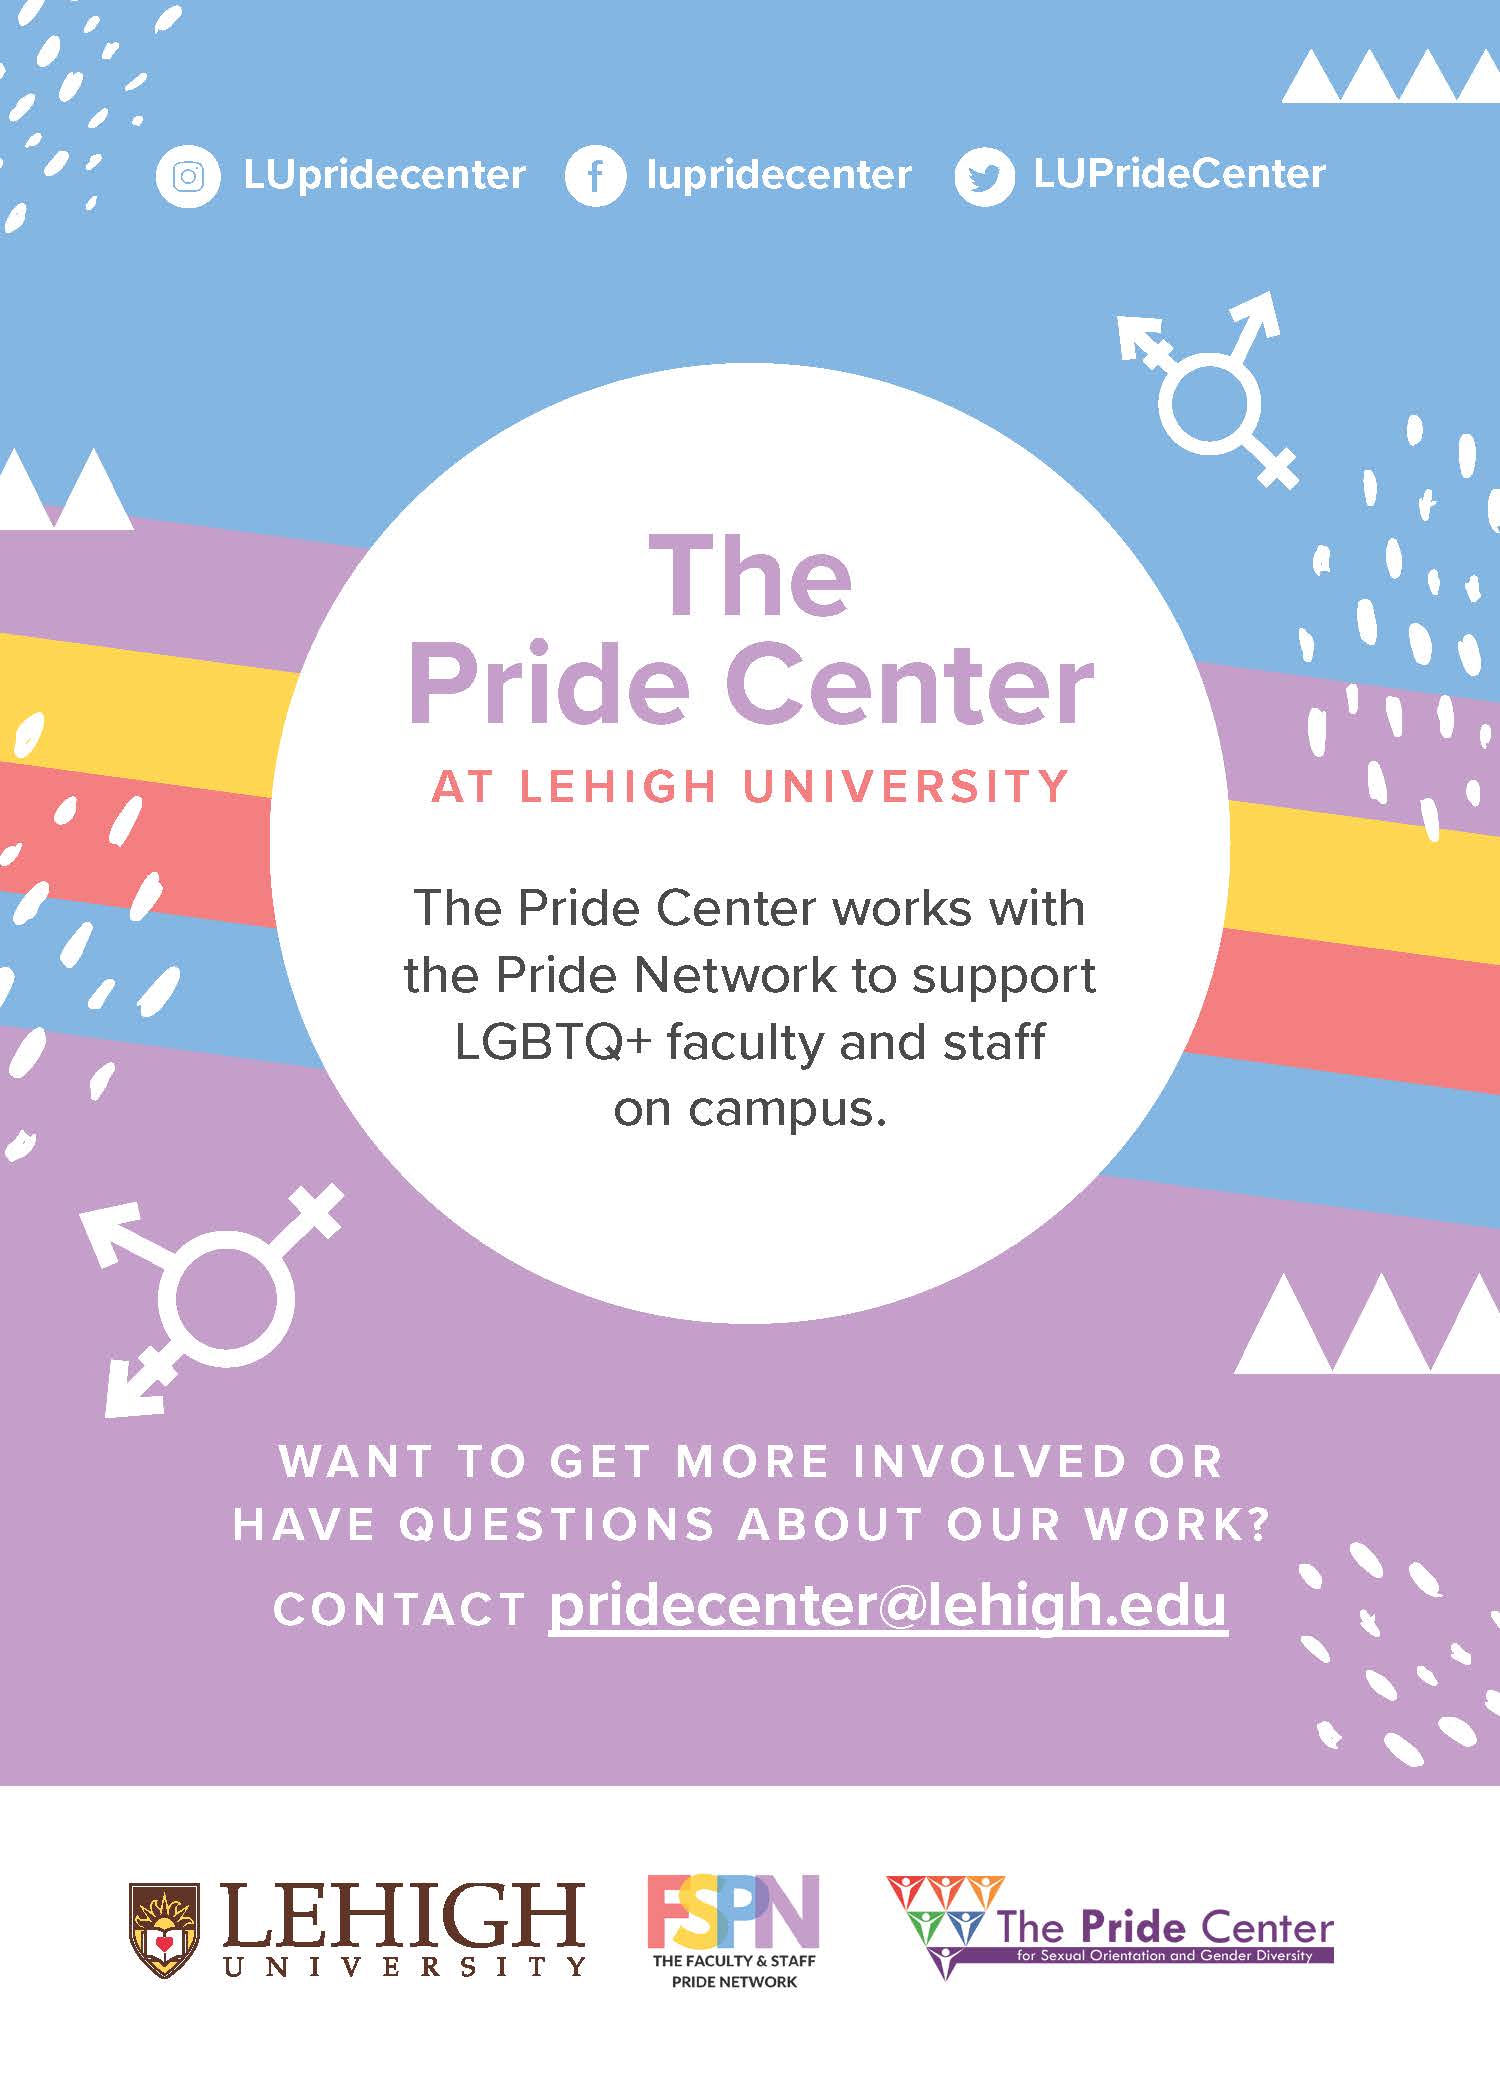 Rainbow colorful Faculty and Staff Pride Network postcard reading: Instagram, Facebook, Twitter, @LUPrideCenter. The Pride Center works with the Pride Network to support LGBTQ+ faculty and staff on campus.WANT TO GET MORE INVOLVED OR HAVE QUESTIONS ABOUT OUR WORK? CONTACT pridecenter@lehigh.edu